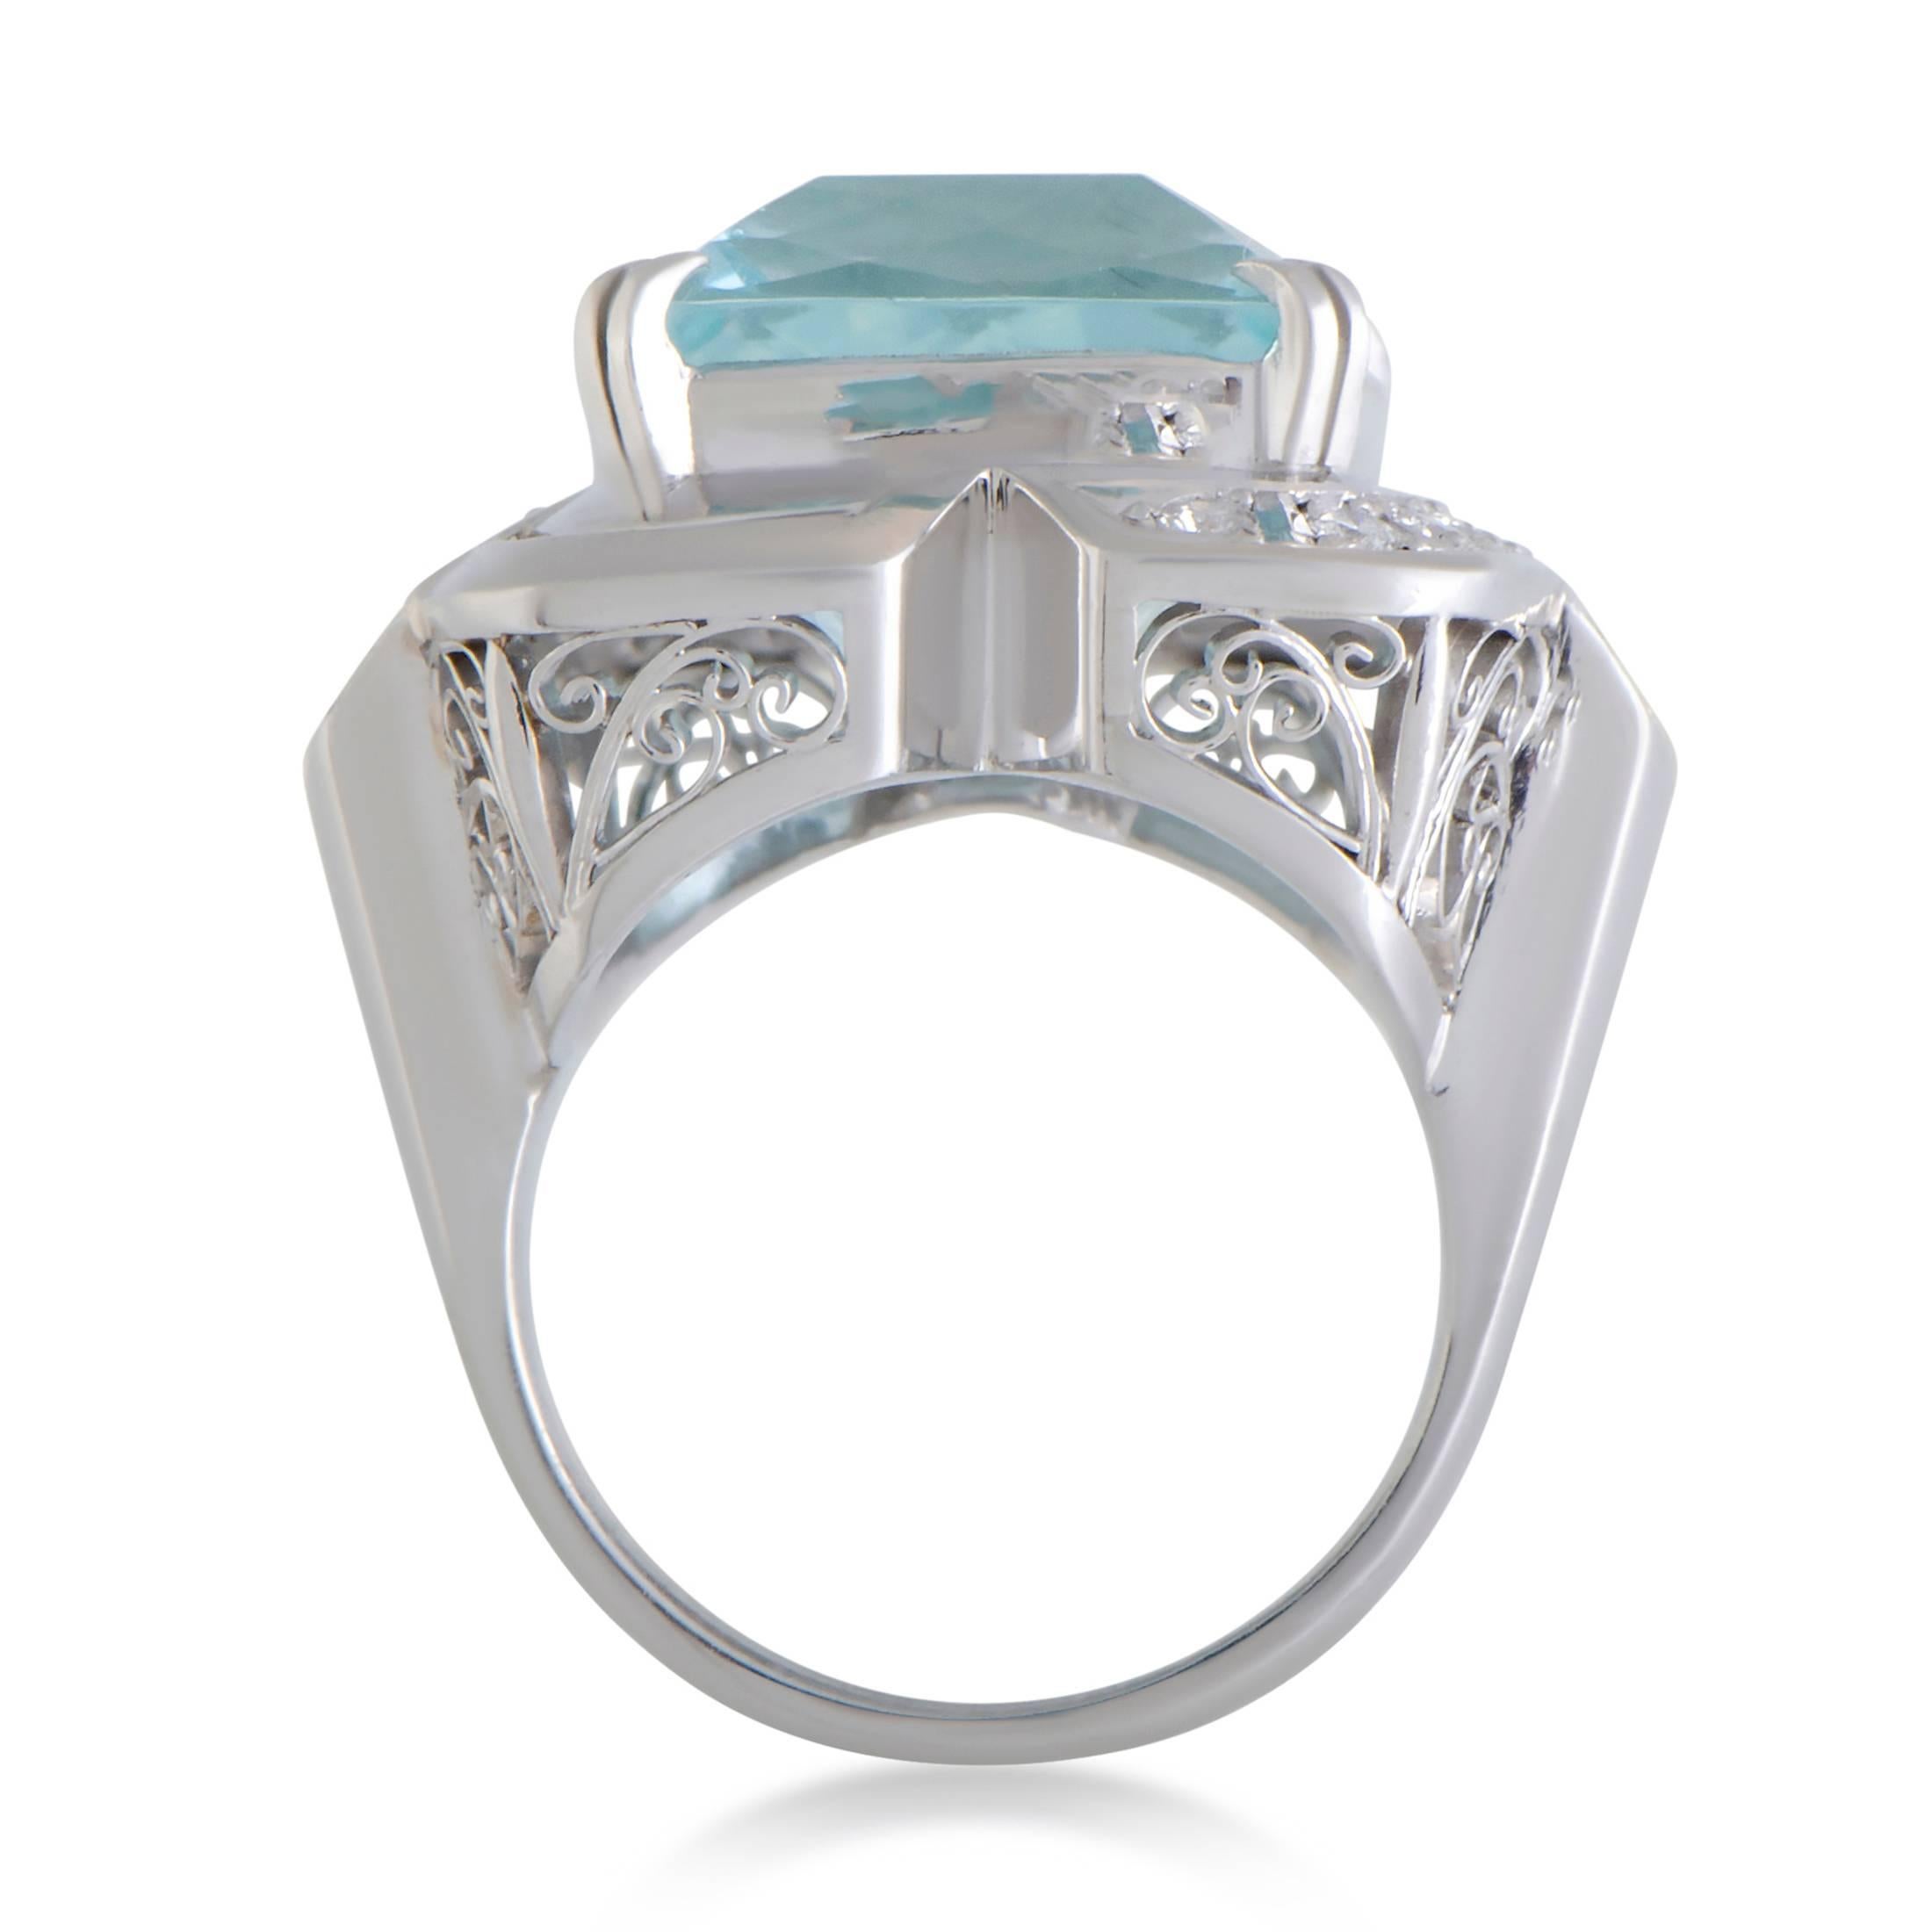 An incredibly bold and offbeat design is magnificently presented in platinum in this stunning ring that offers a compellingly fashionable appearance. The star of the show is a sublime aquamarine that weighs 12.94 carats and is accompanied by 0.29